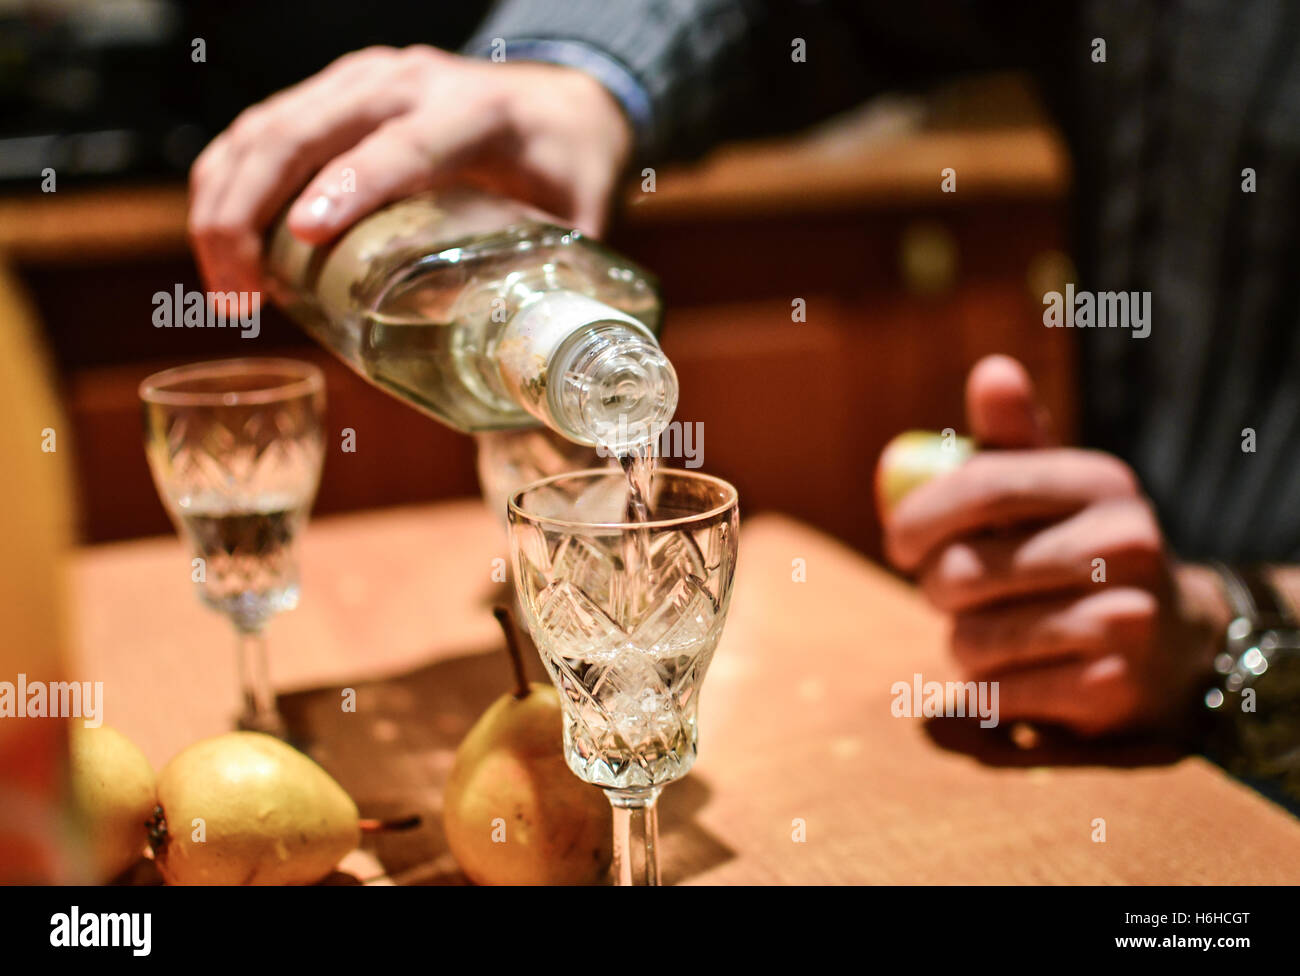 Man pouring strong alcoholic drink vodka in glass Stock Photo